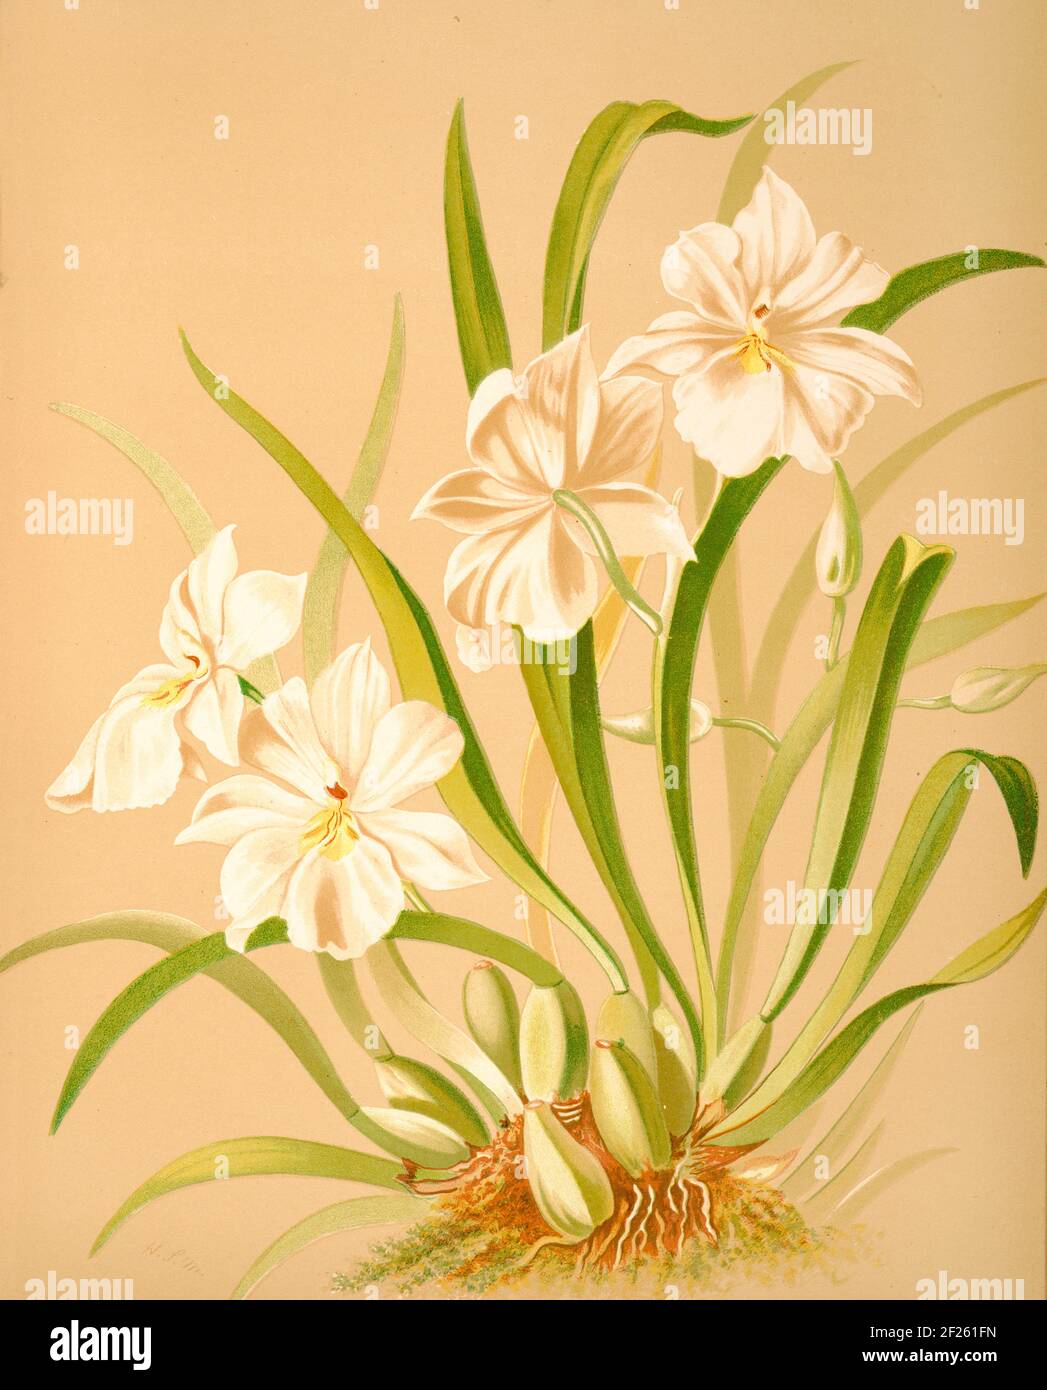 Harriet Stewart Miner's botanical vintage illustration from Orchids - The Royal Family of Plants from 1885 - Odontoglossum roezlii album Stock Photo